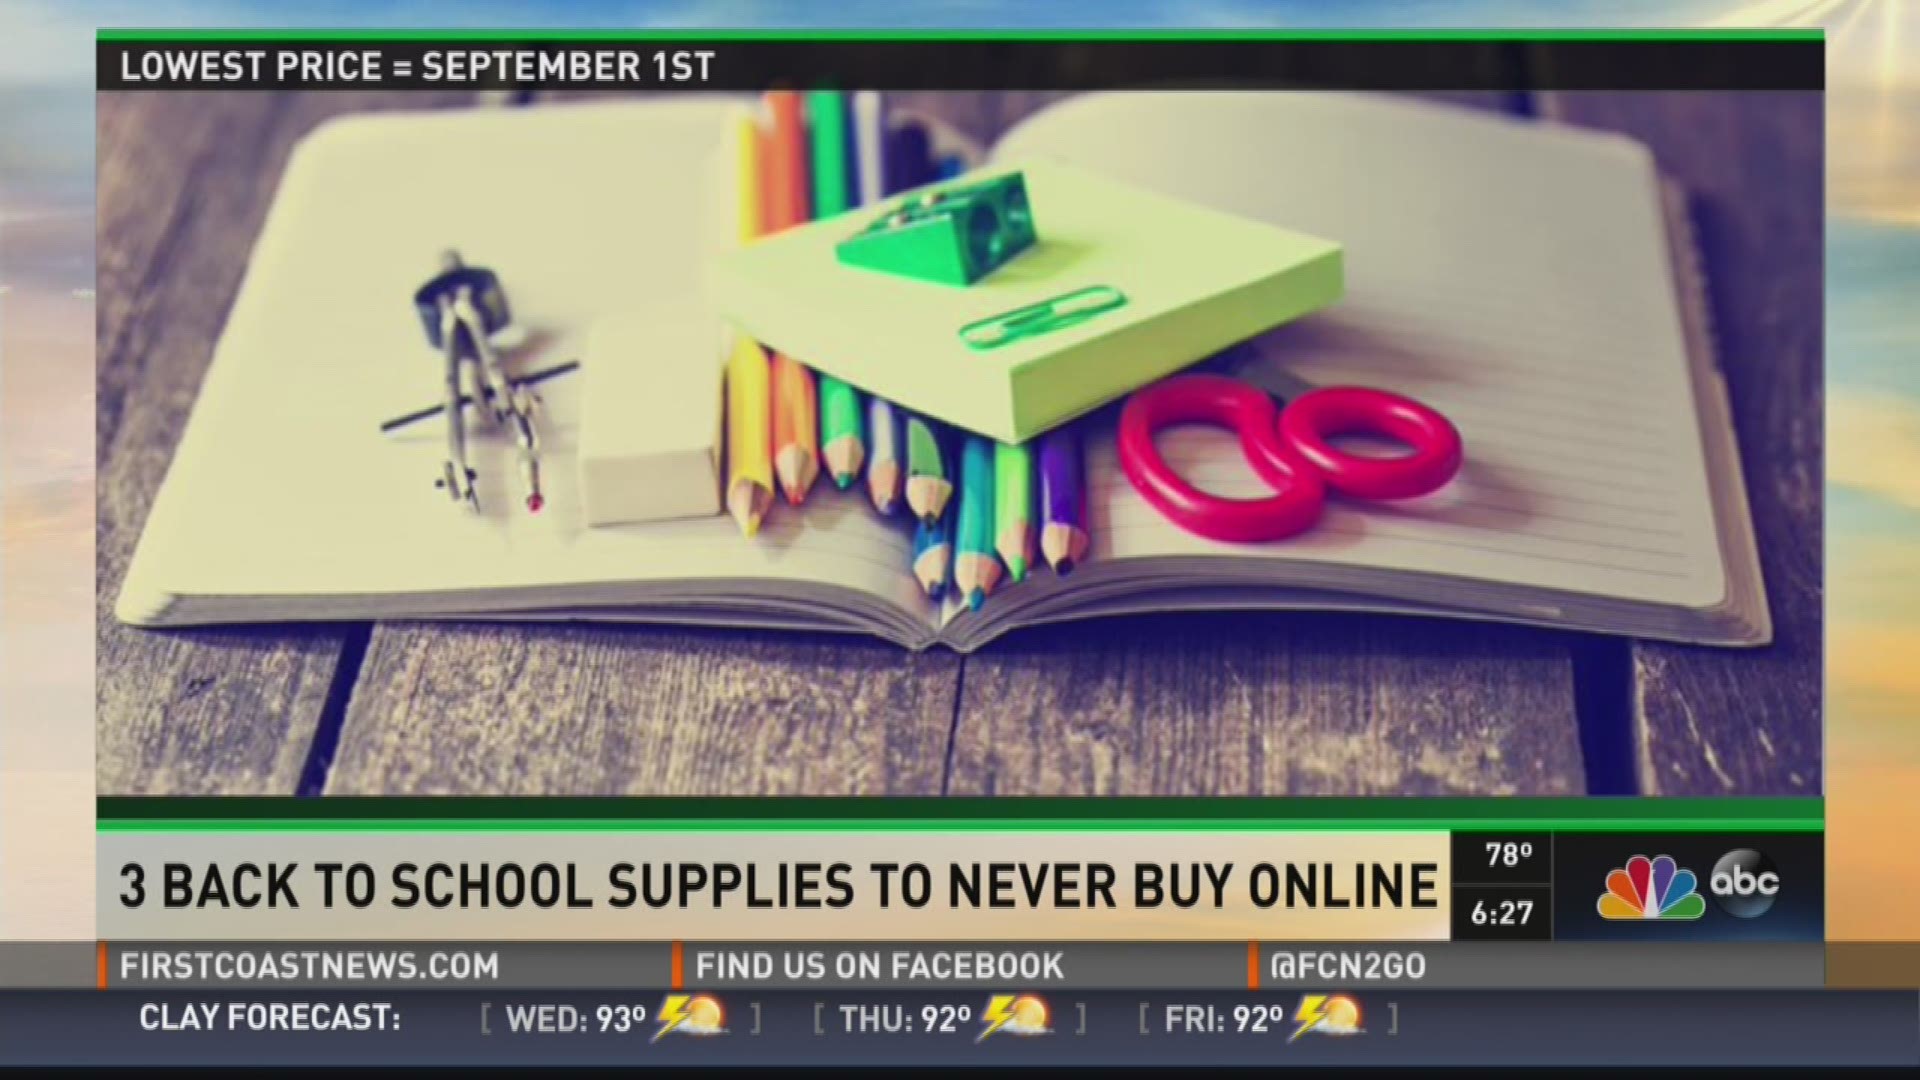 3 Back to School supplies to never buy online